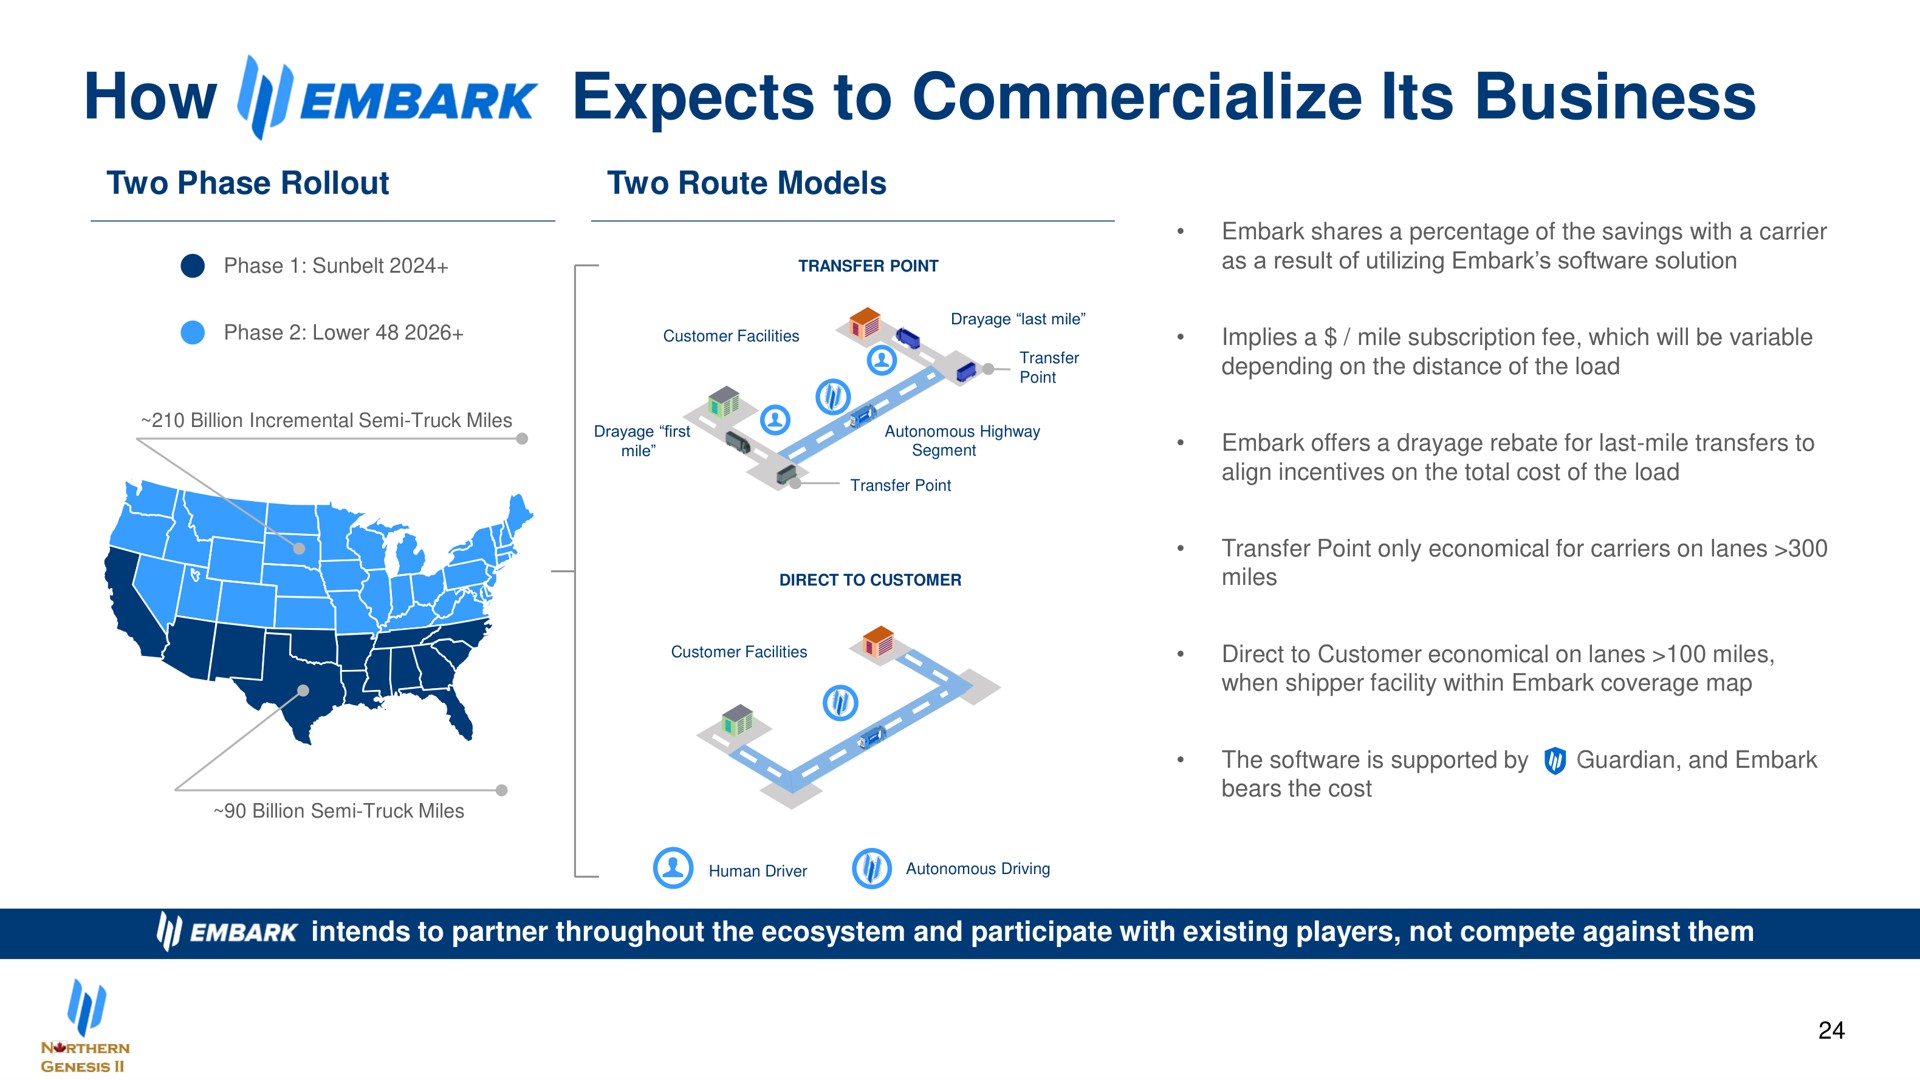 how expects to commercialize its business embark | Embark